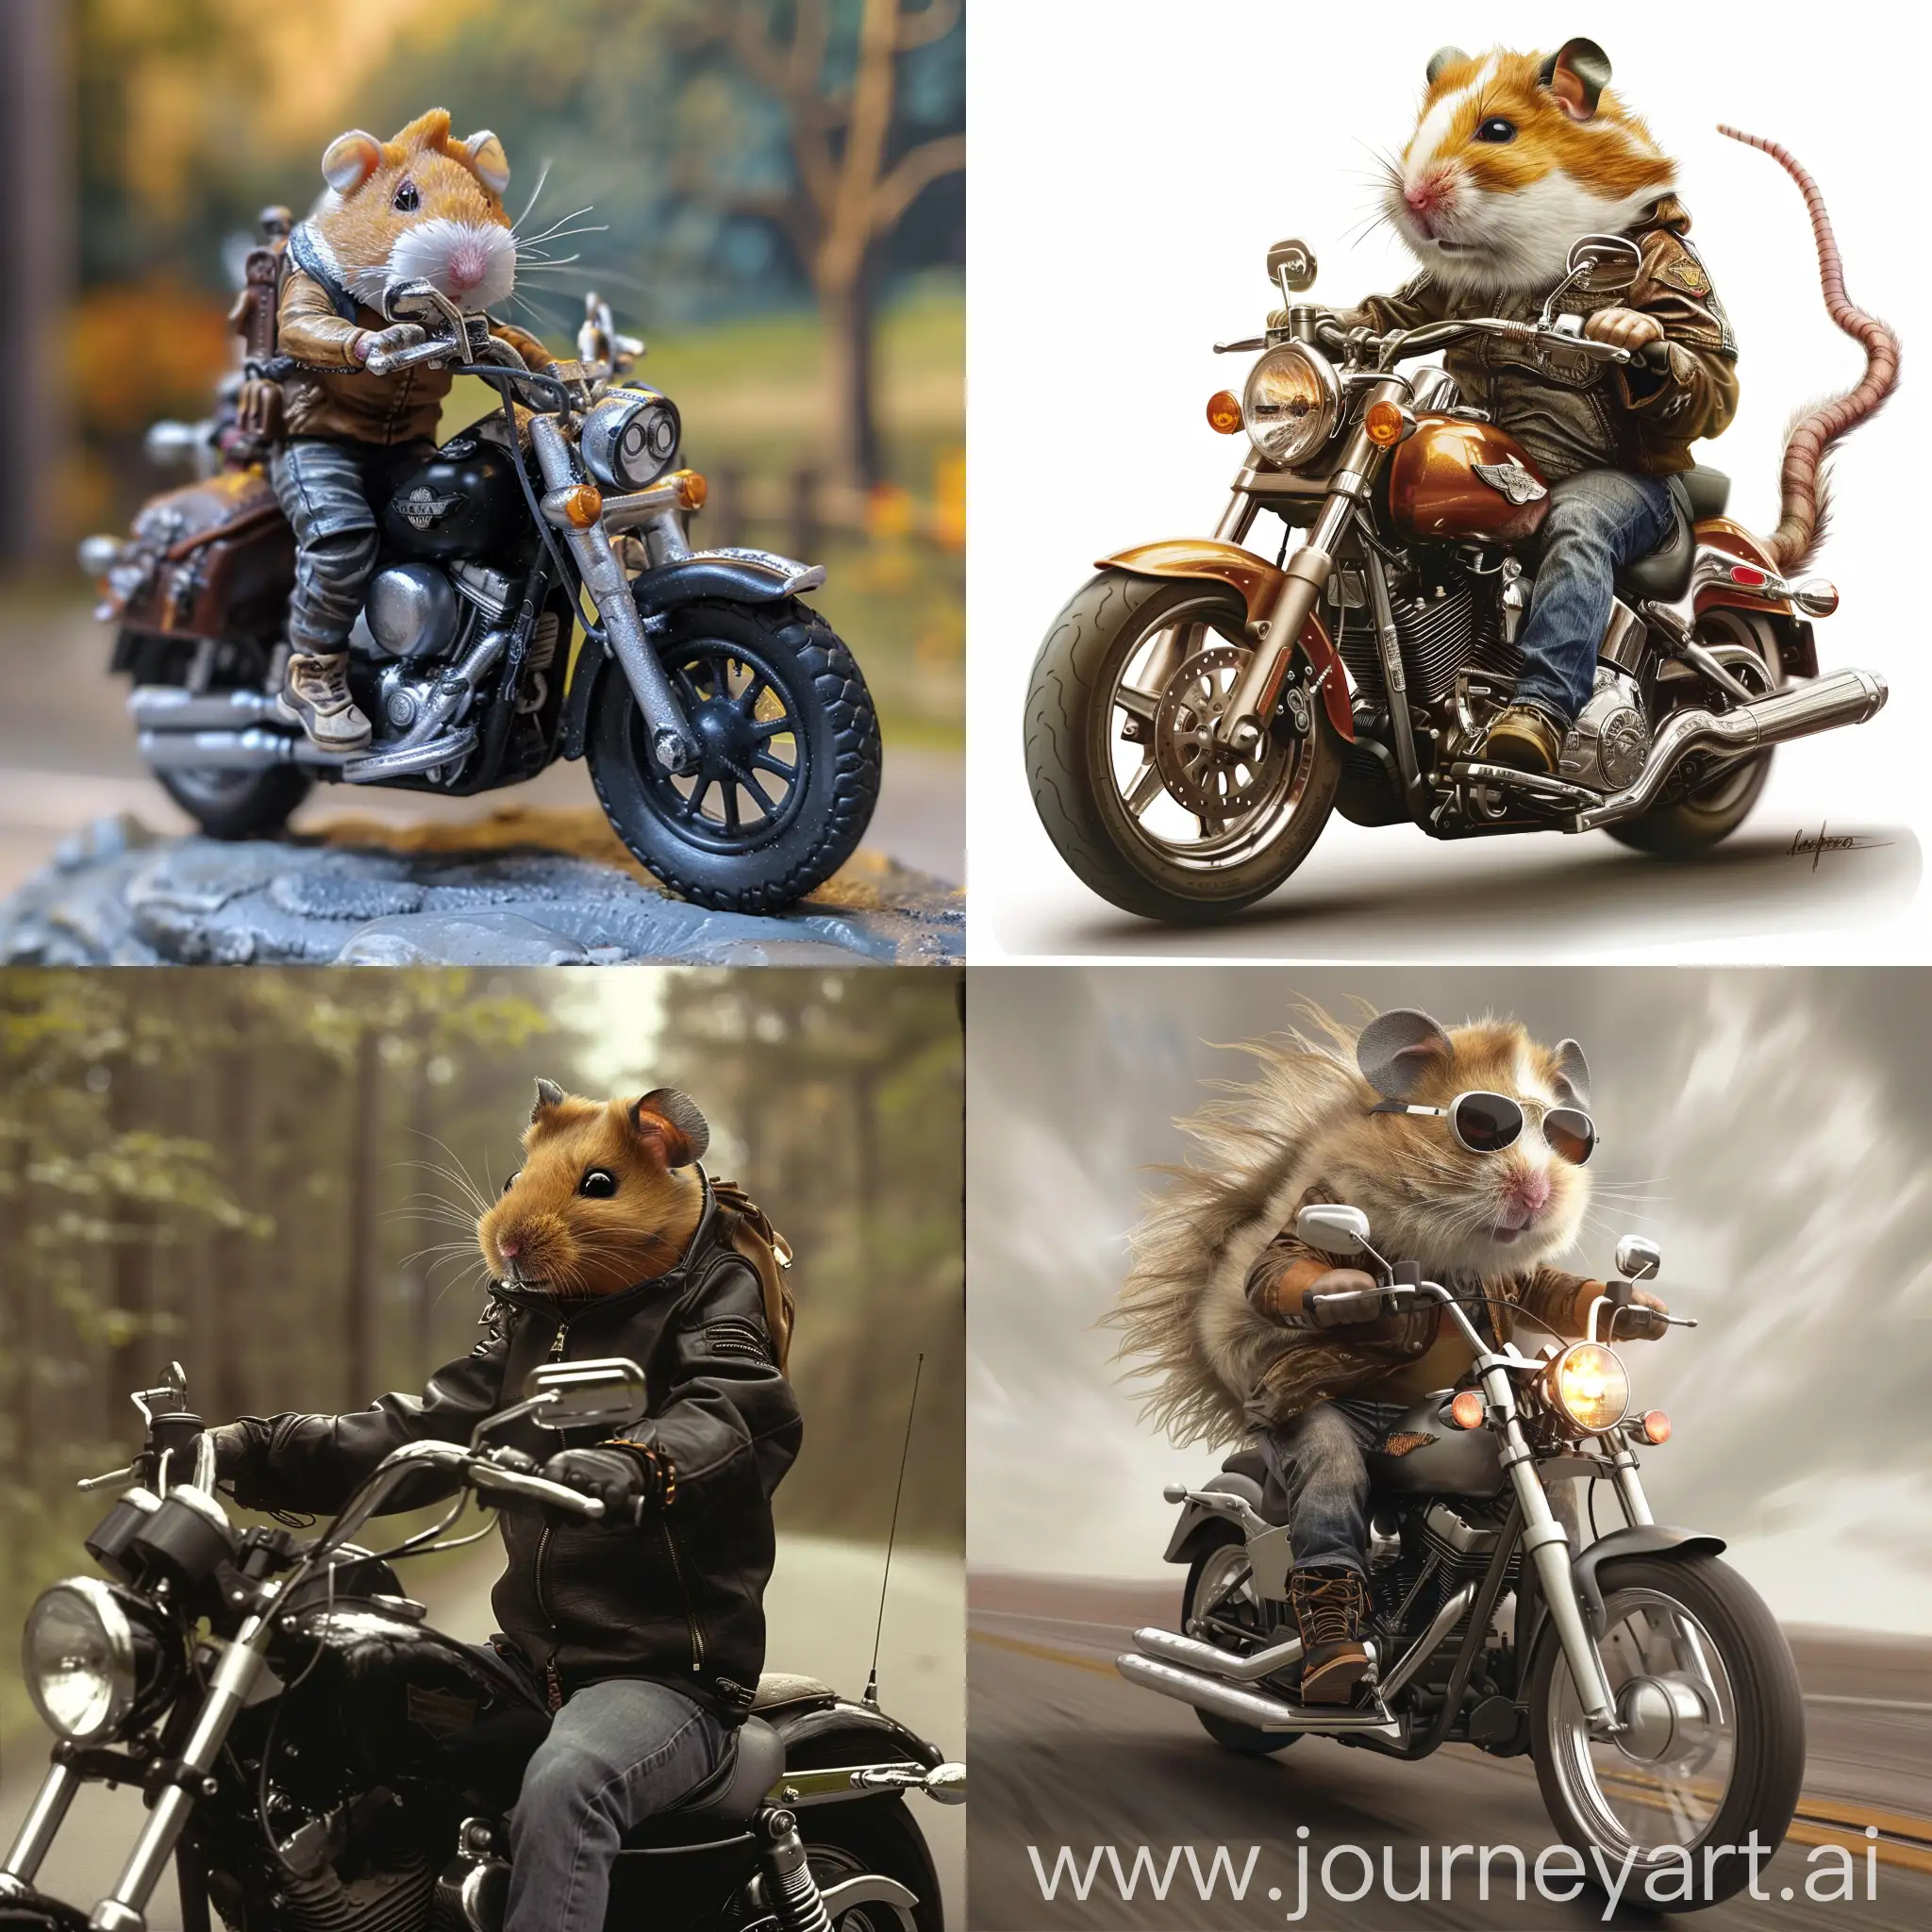 A Tuttle with hamster Head riding a Harley Davidson